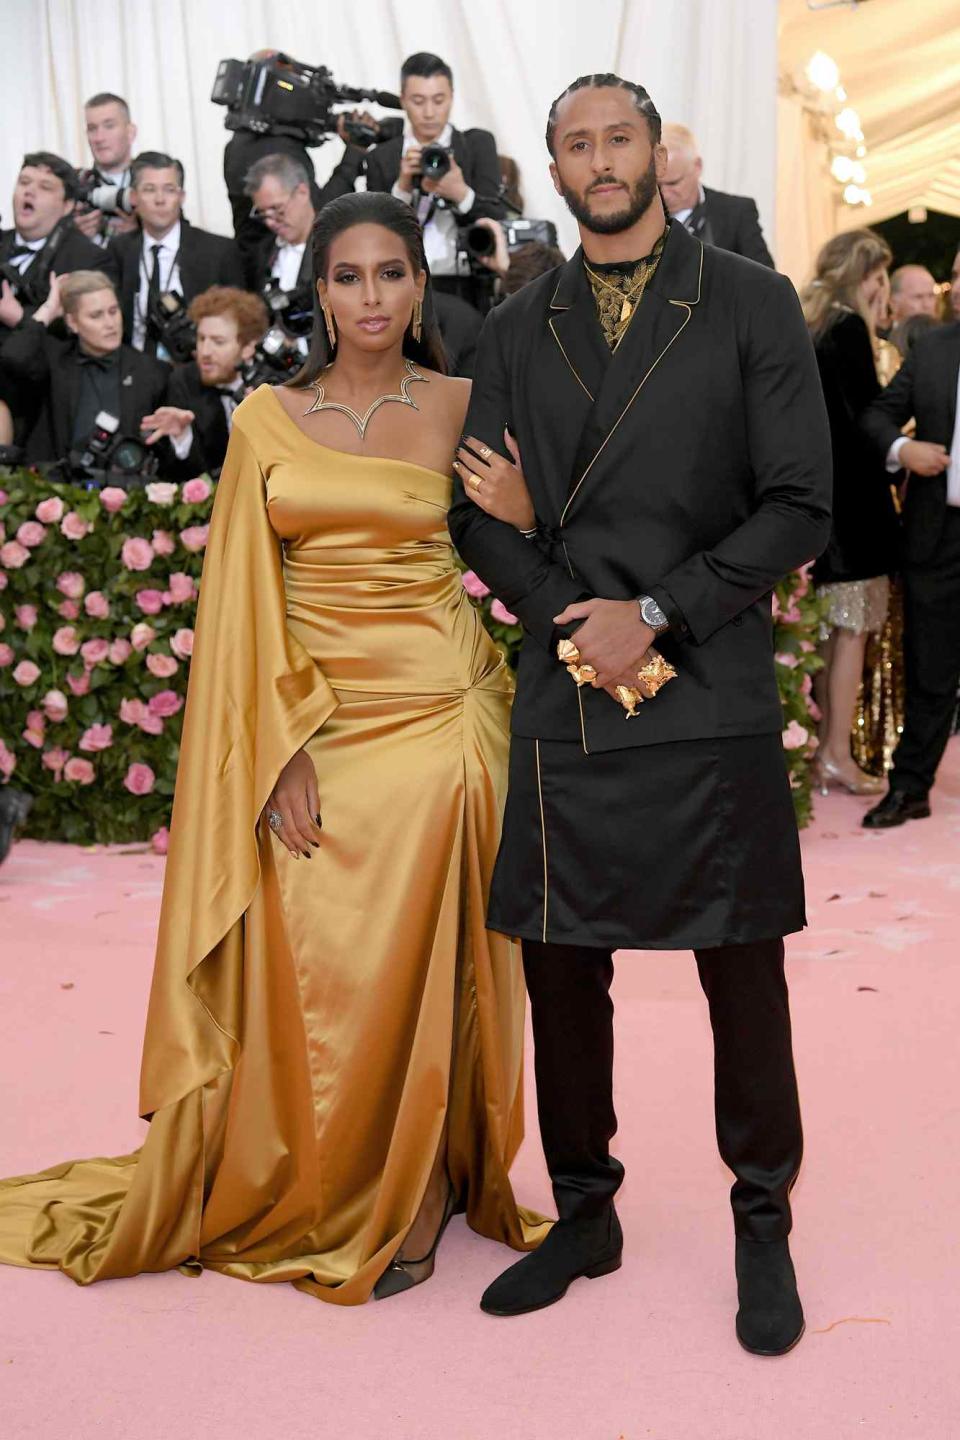 Nessa and Colin Kaepernick attend The 2019 Met Gala Celebrating Camp: Notes on Fashion at Metropolitan Museum of Art on May 06, 2019 in New York City